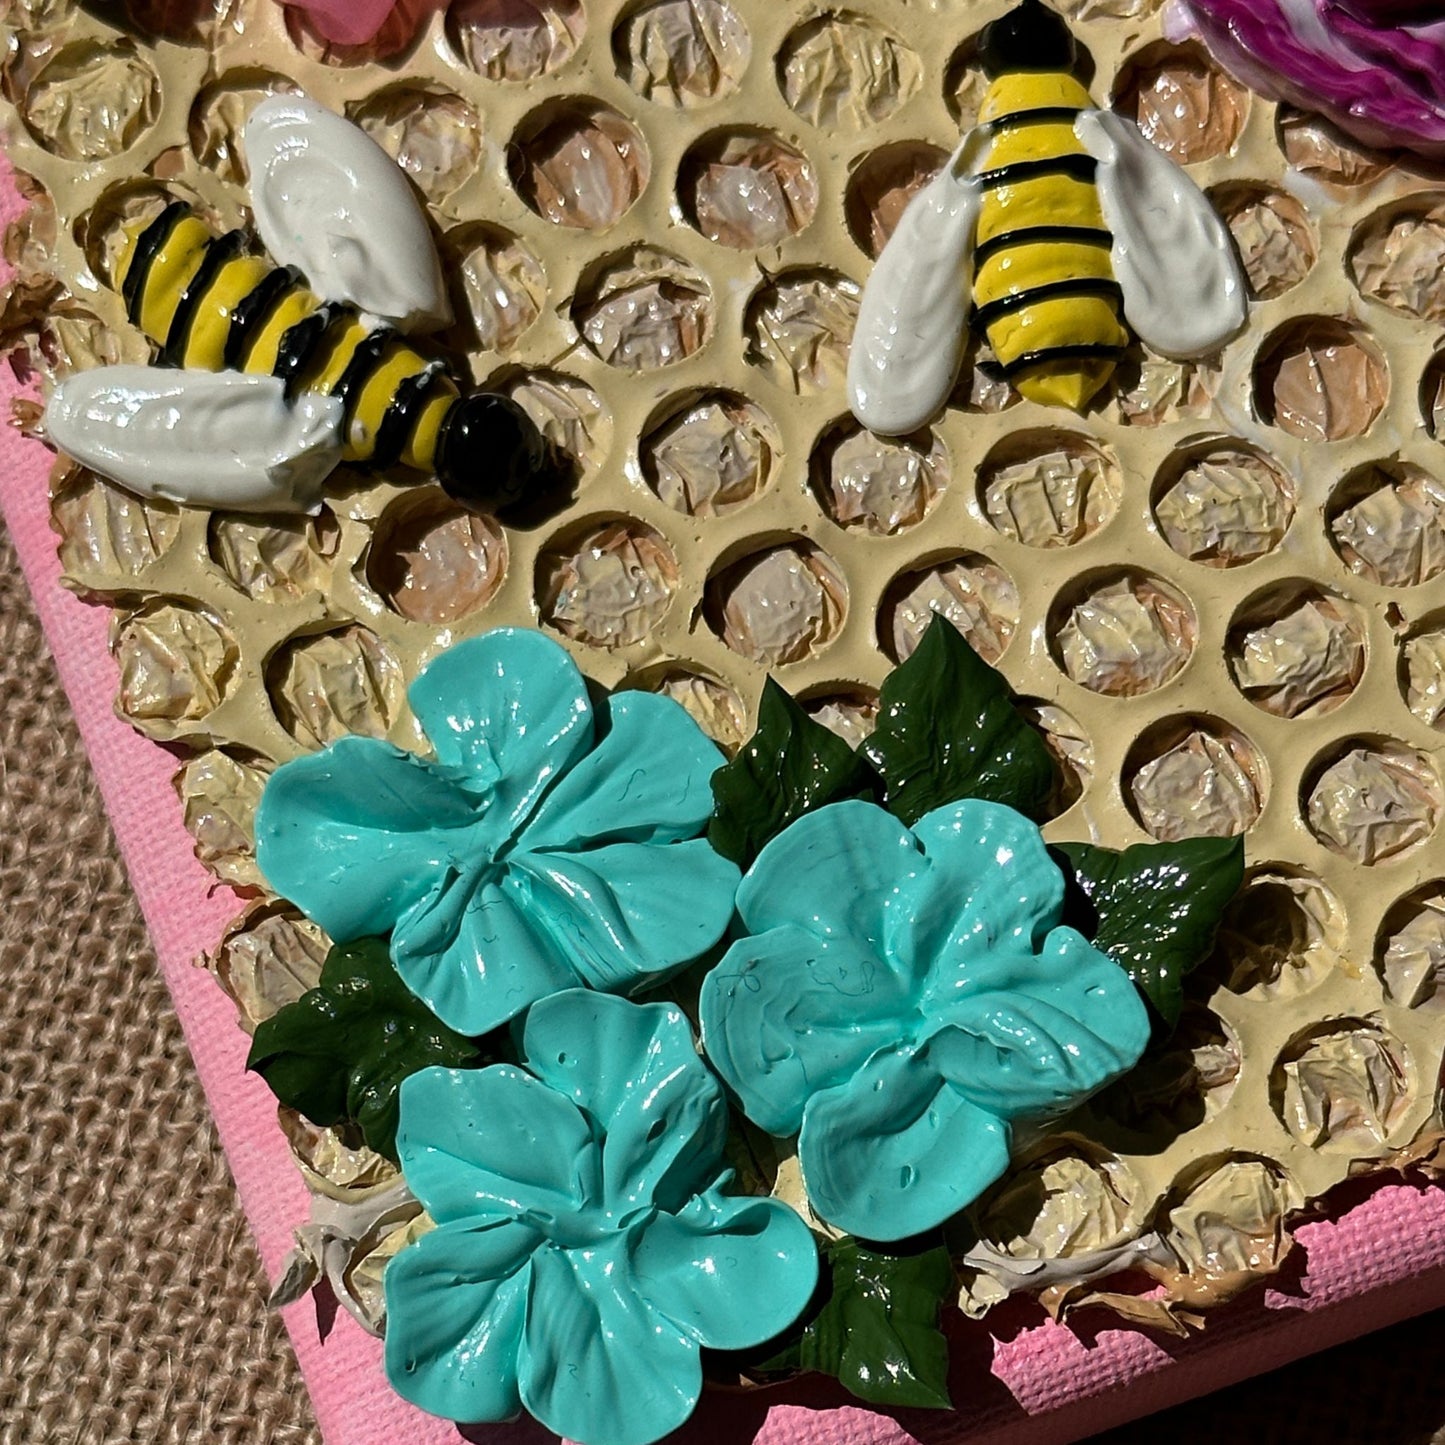 3D Bees and Multicolored Flowers on Pink Canvas 8"x8"